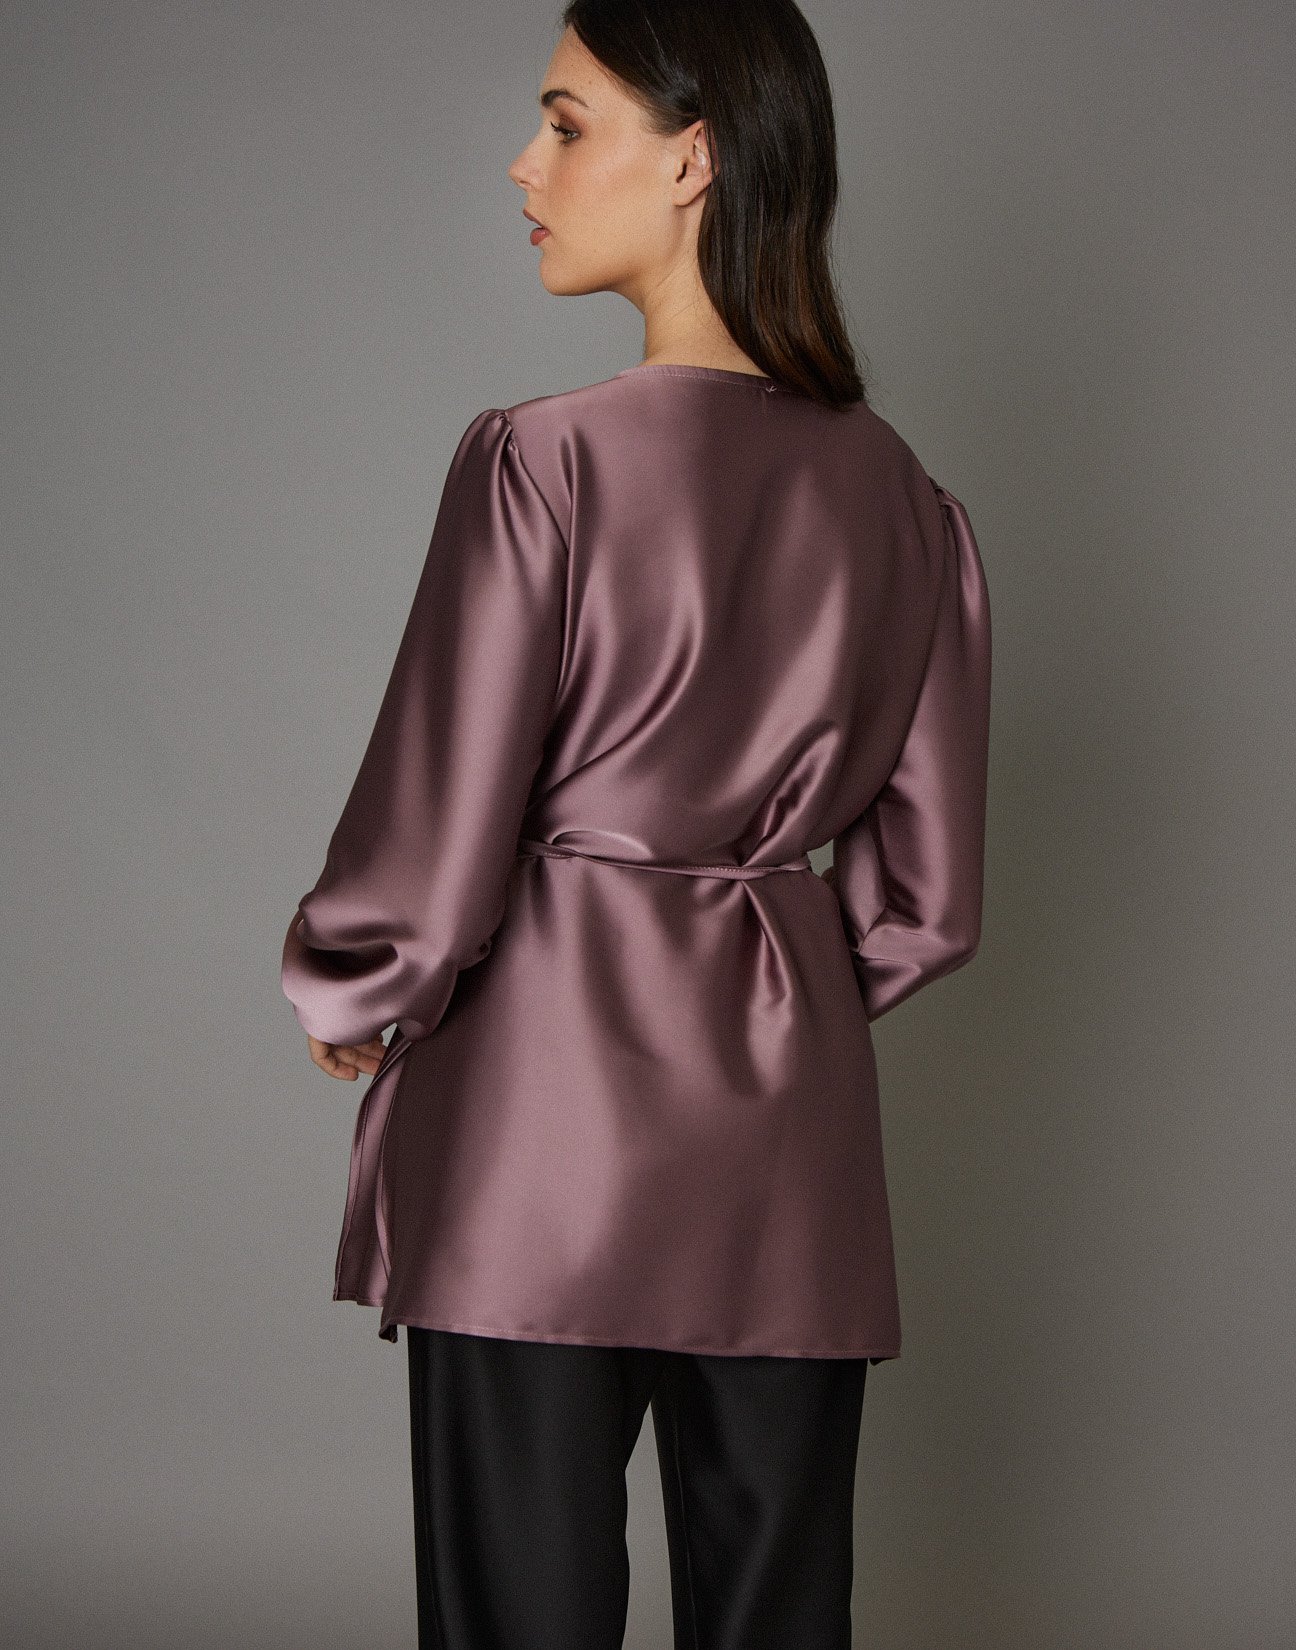 Satin blouse with lace